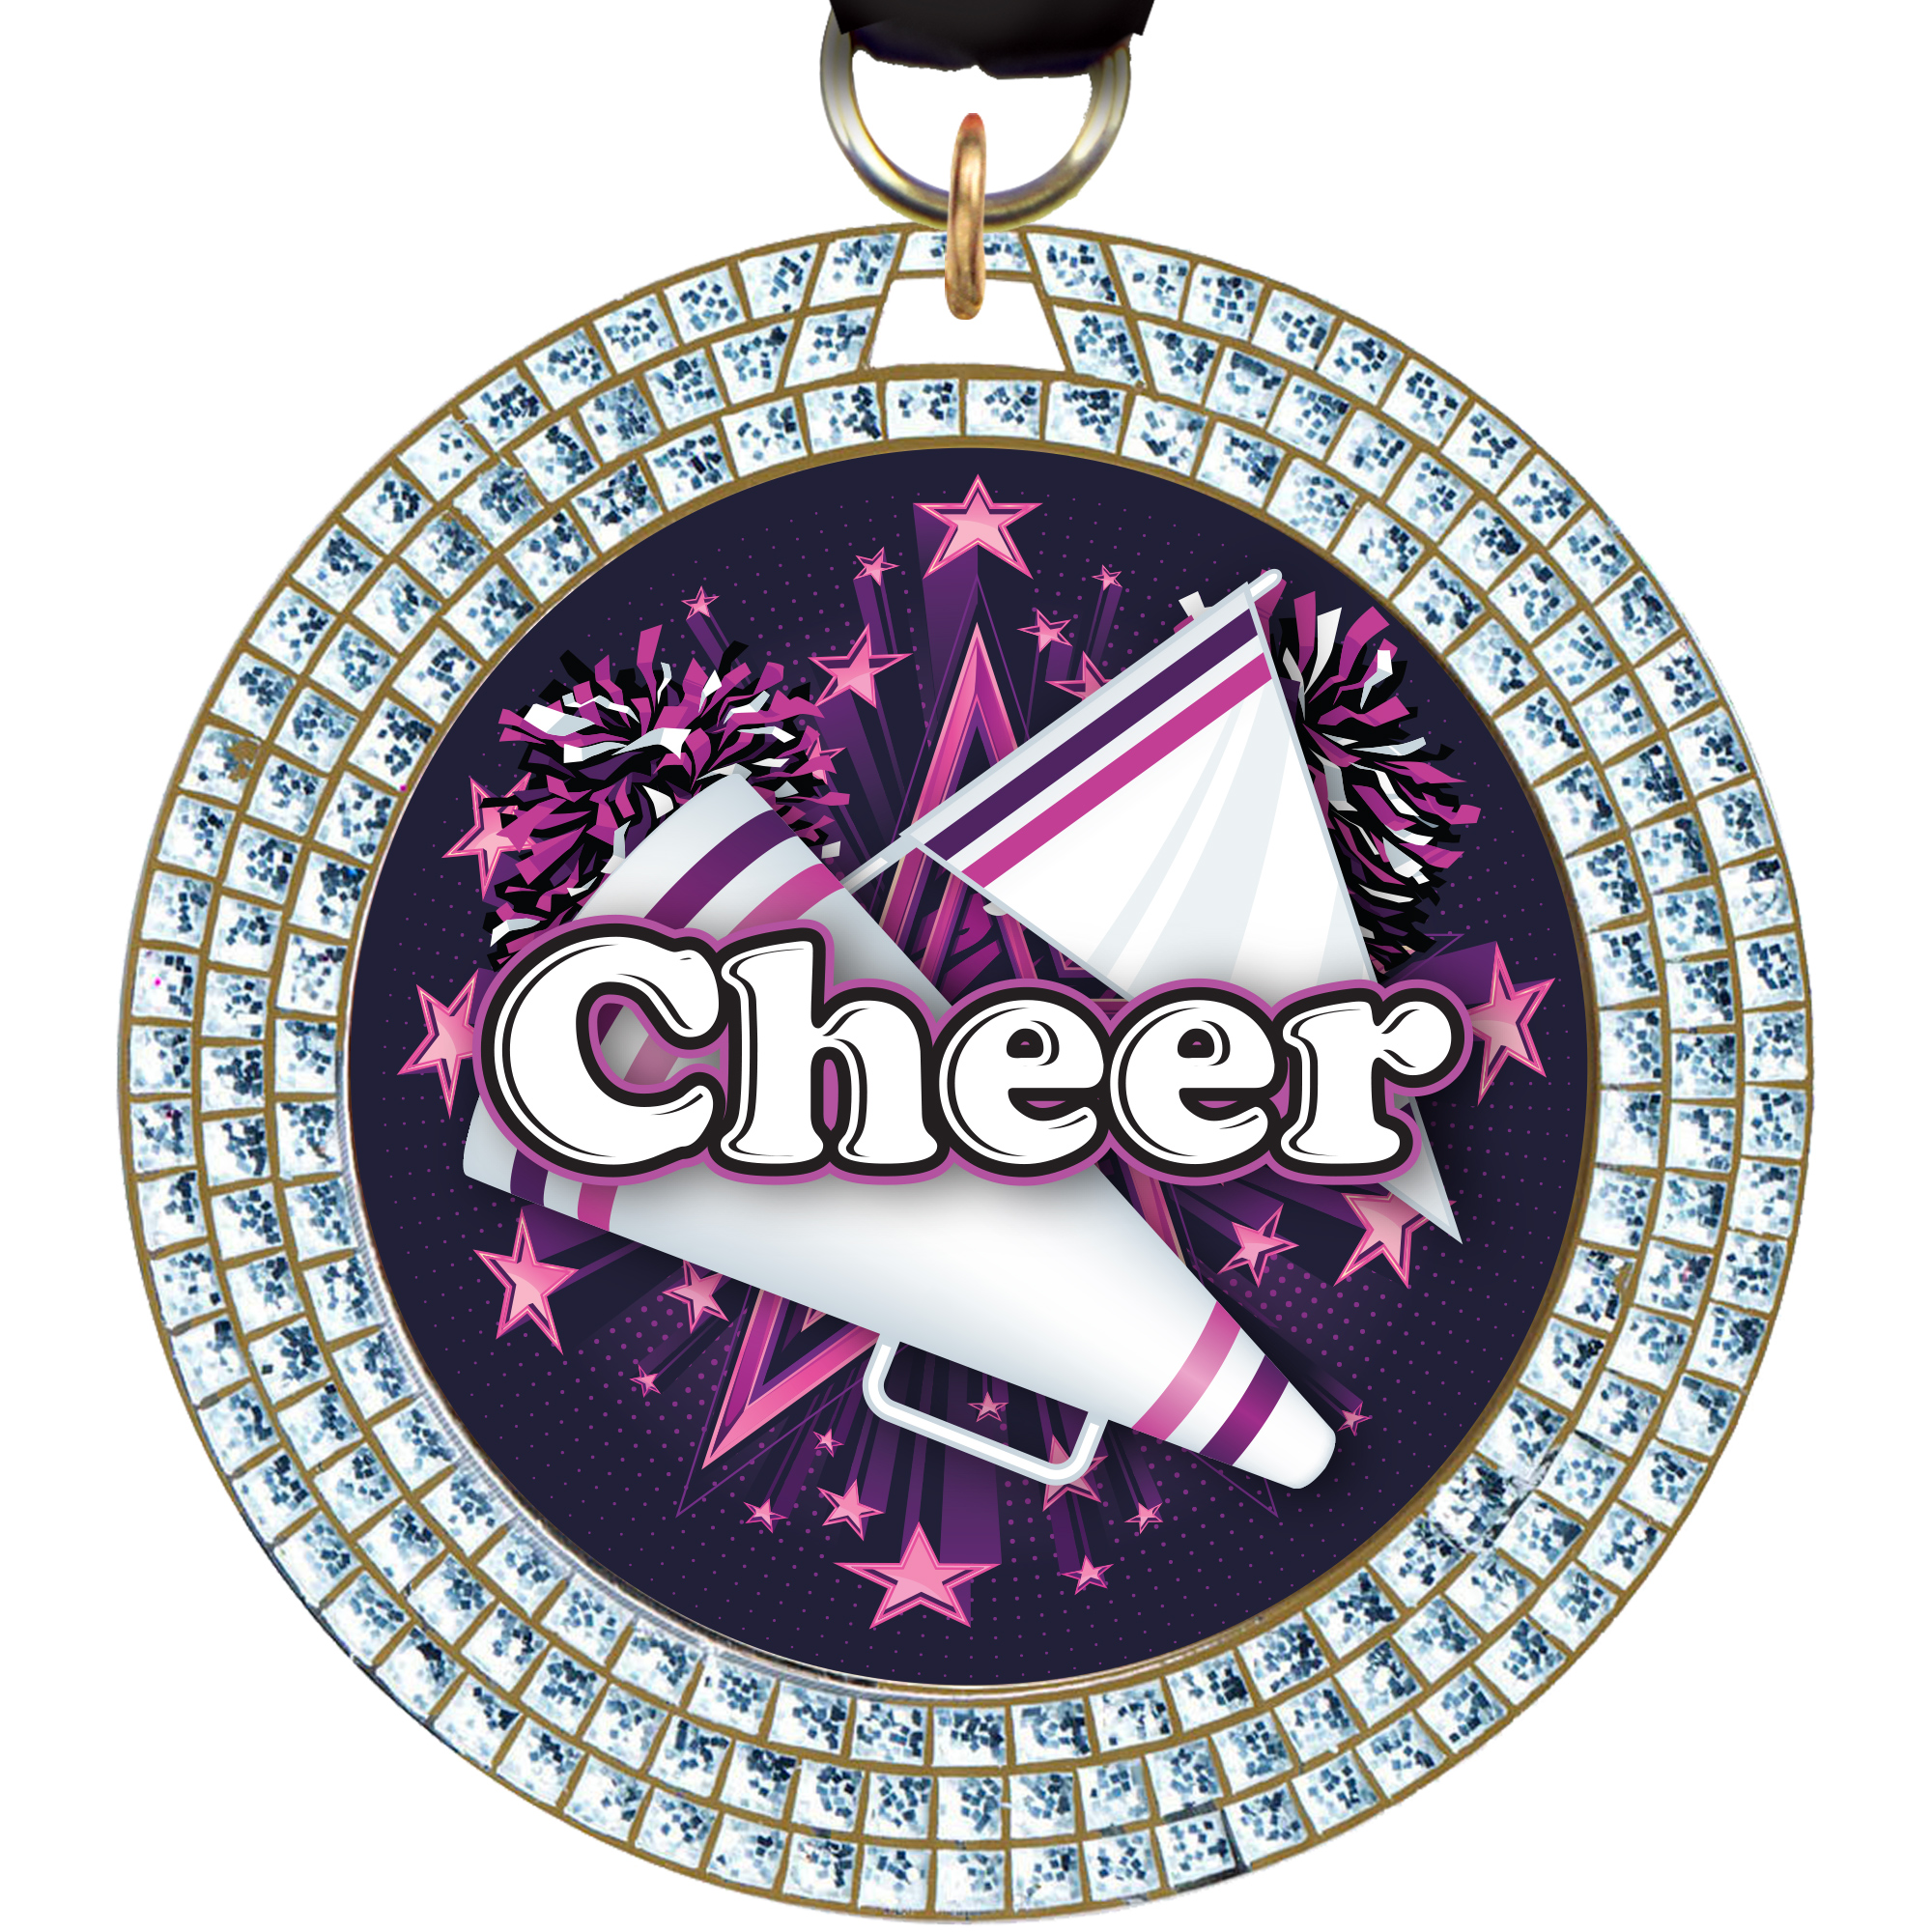 Silver Triple Sparkle 3D Dome Insert Medals